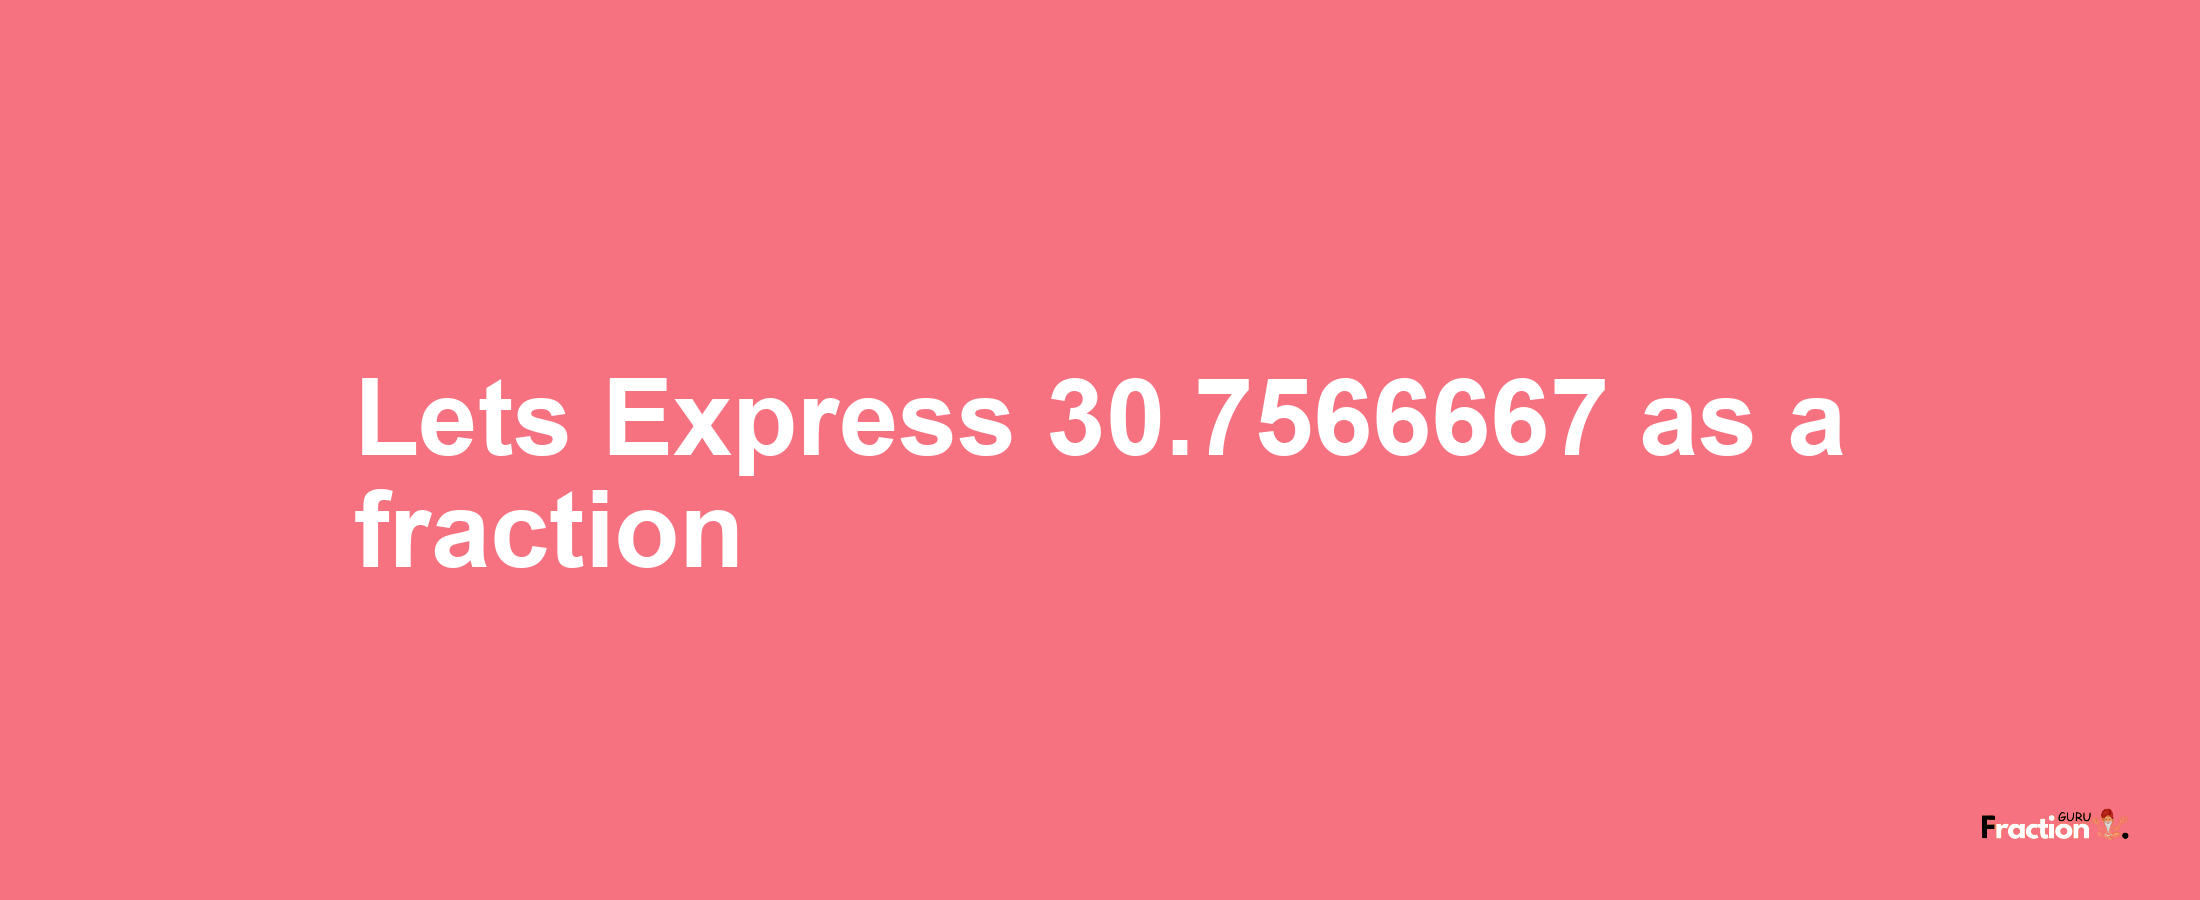 Lets Express 30.7566667 as afraction